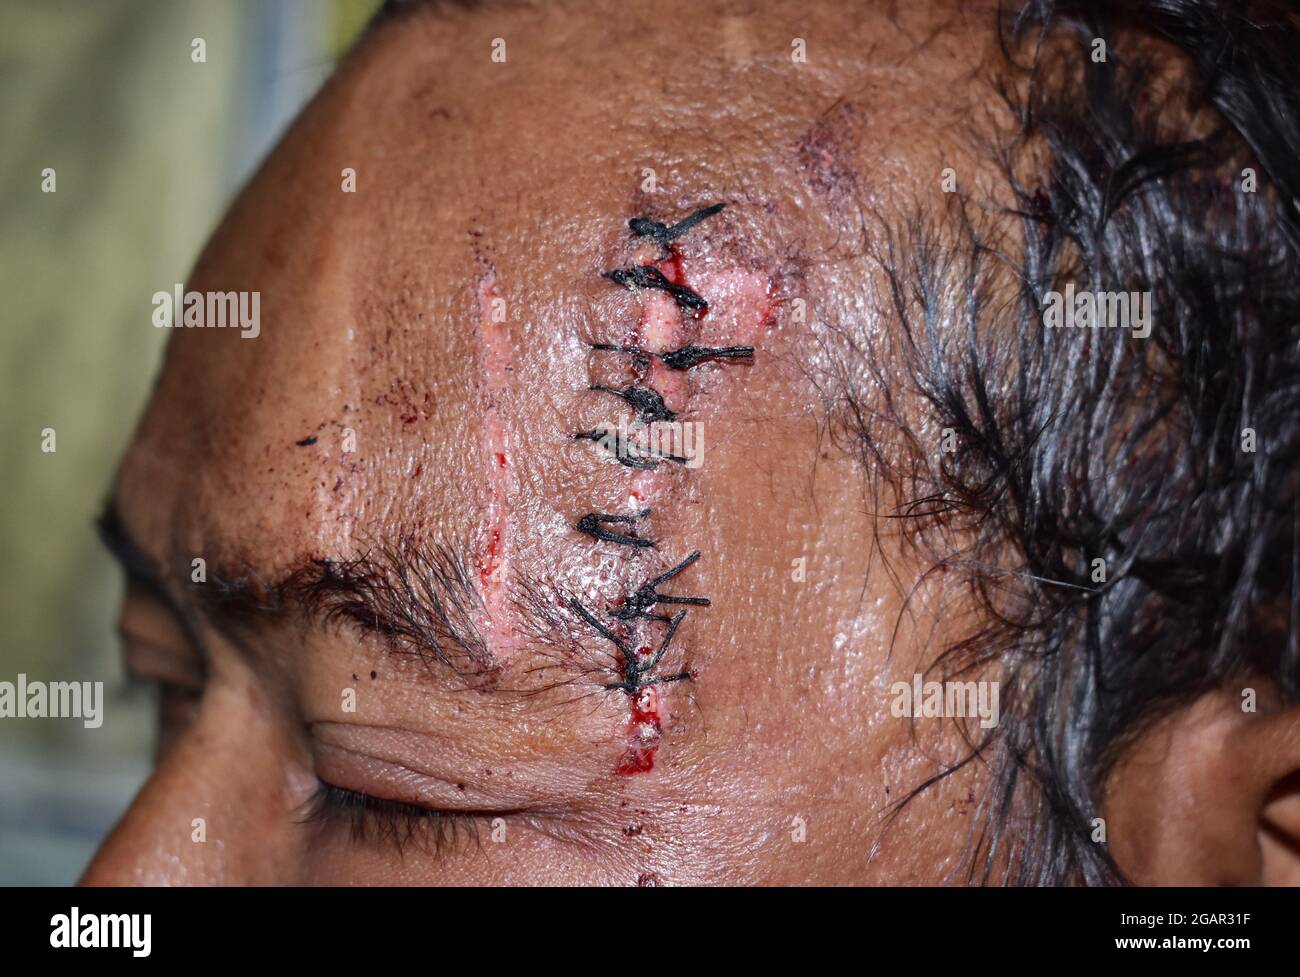 Stitched wound and abrasions  in temporal area of Southeast Asian man. Stock Photo